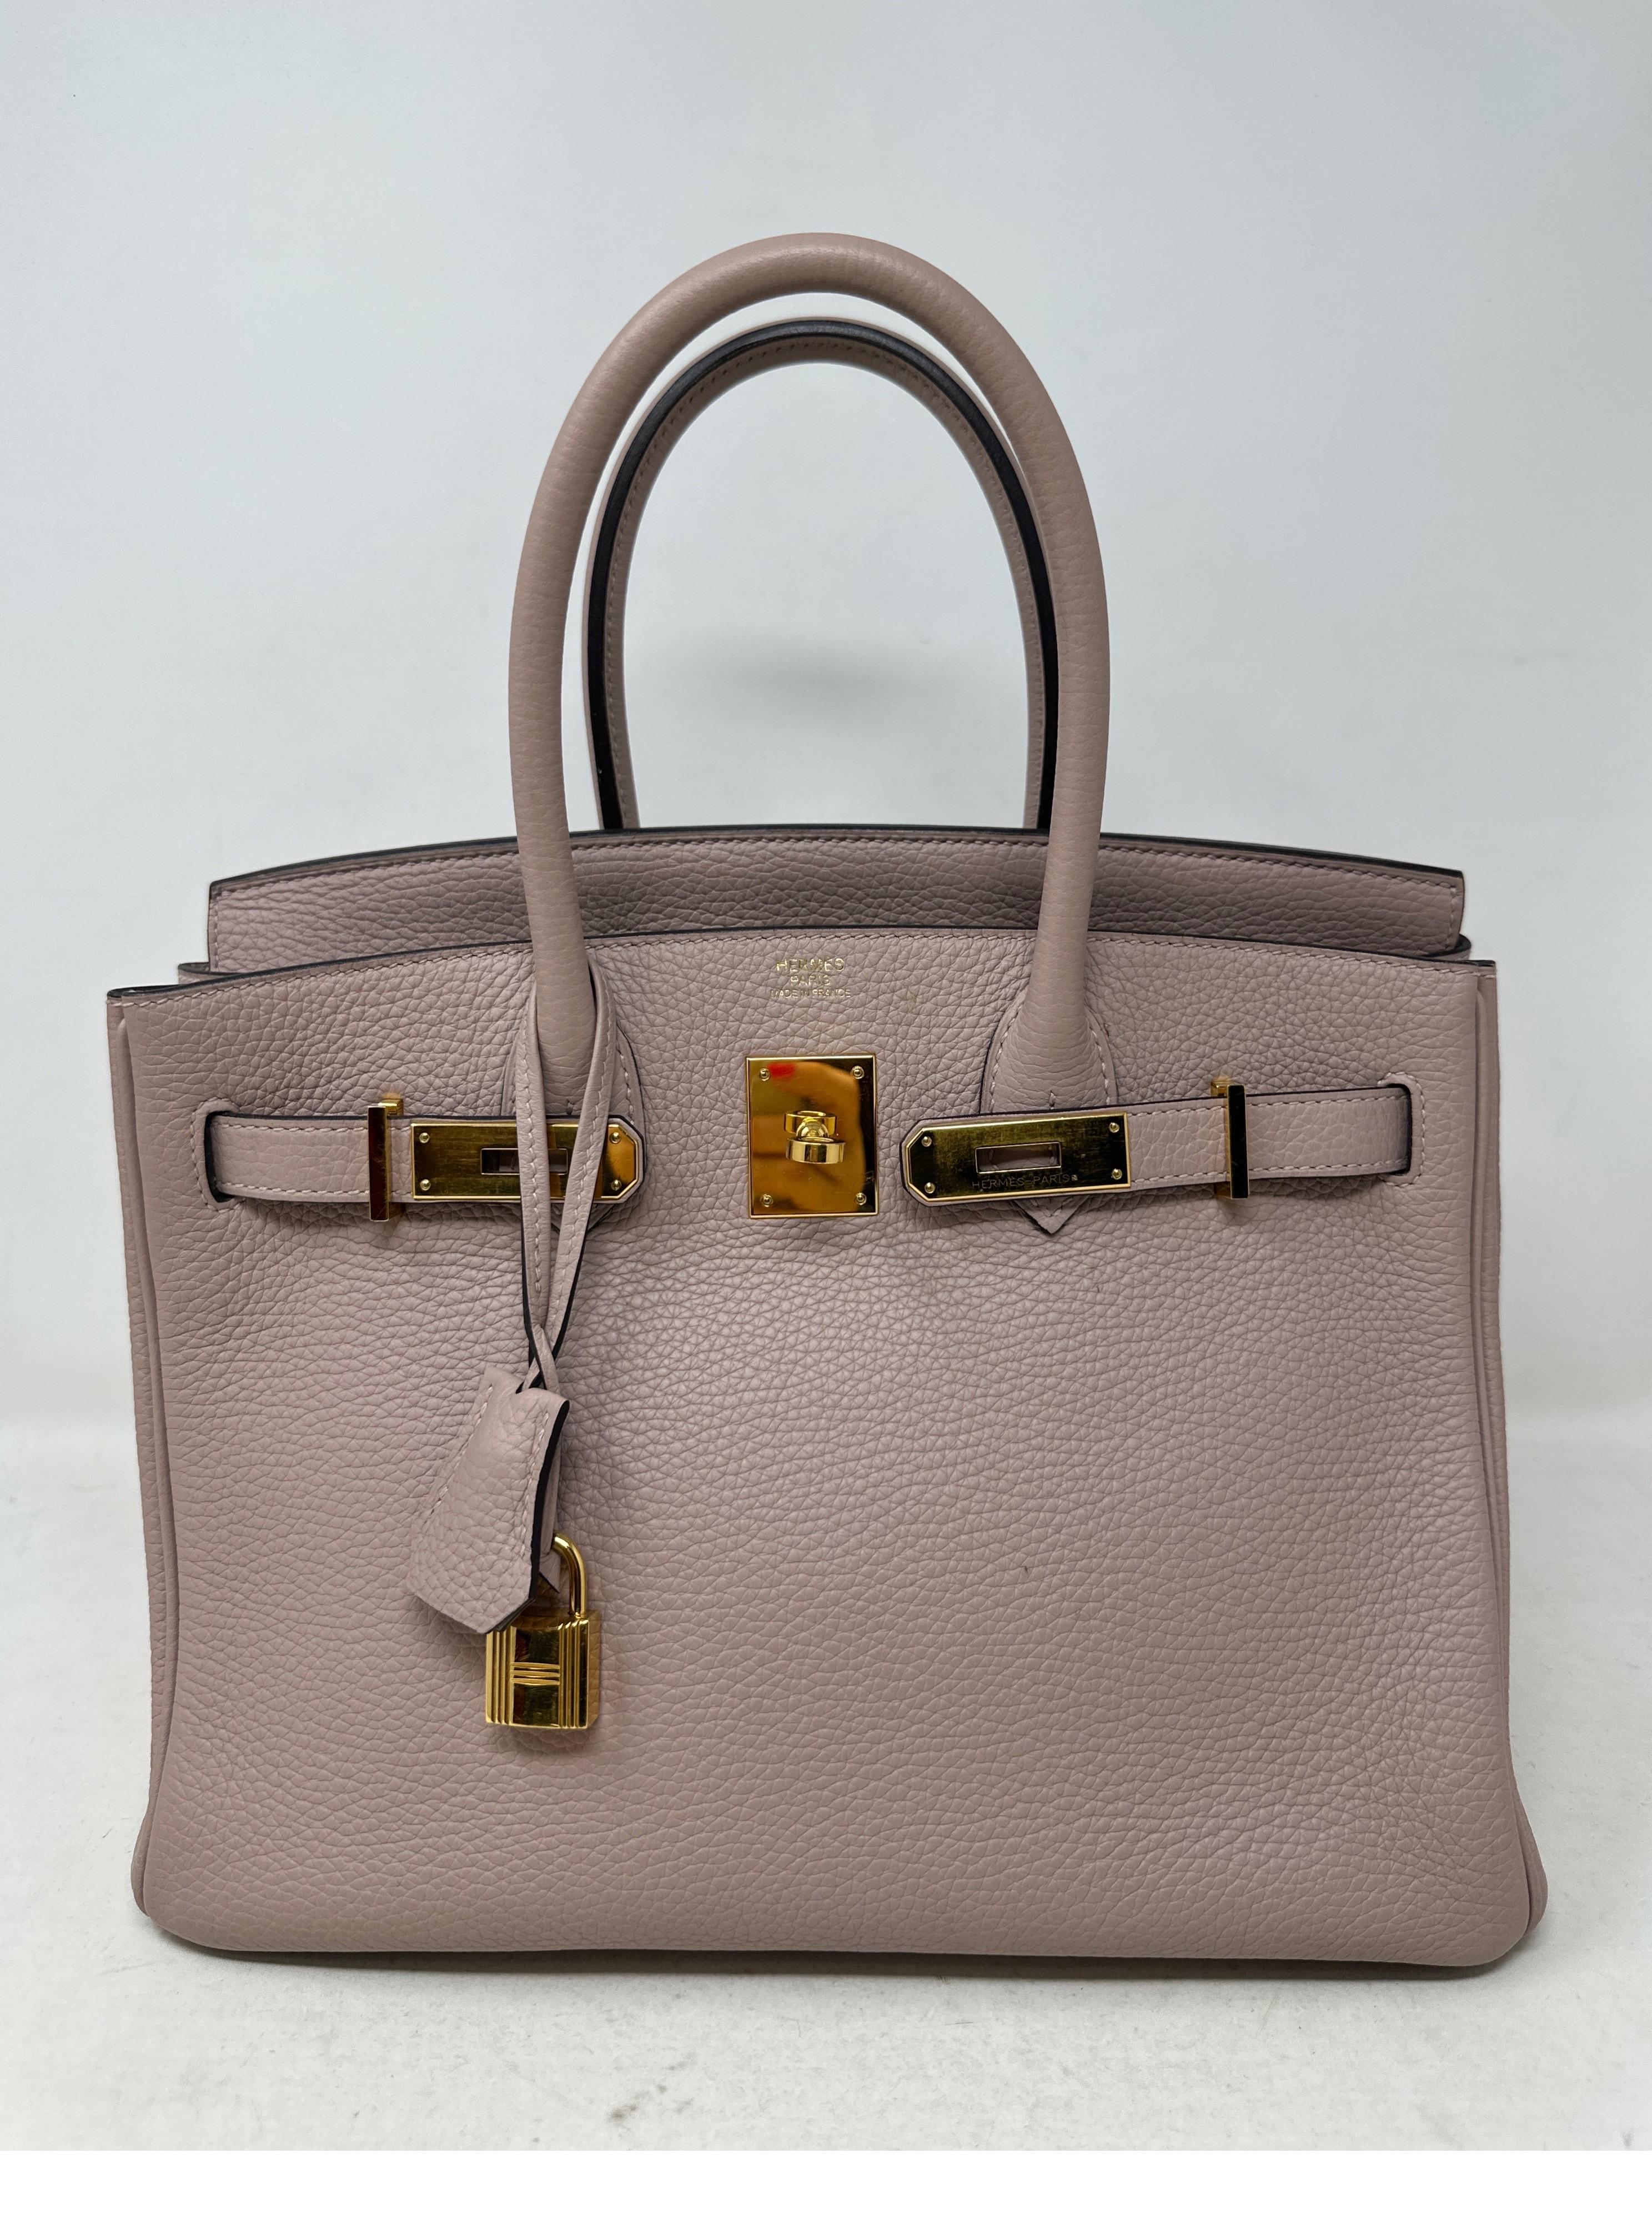 Hermes Glycine Birkin 30 Bag. Light pink taupe color. Rare color and gold hardware. Togo leather. Some wear on inside. Please see photos. Most wanted size Birkin. Includes clochette, lock, keys, and dust bag. Guaranteed authentic. 